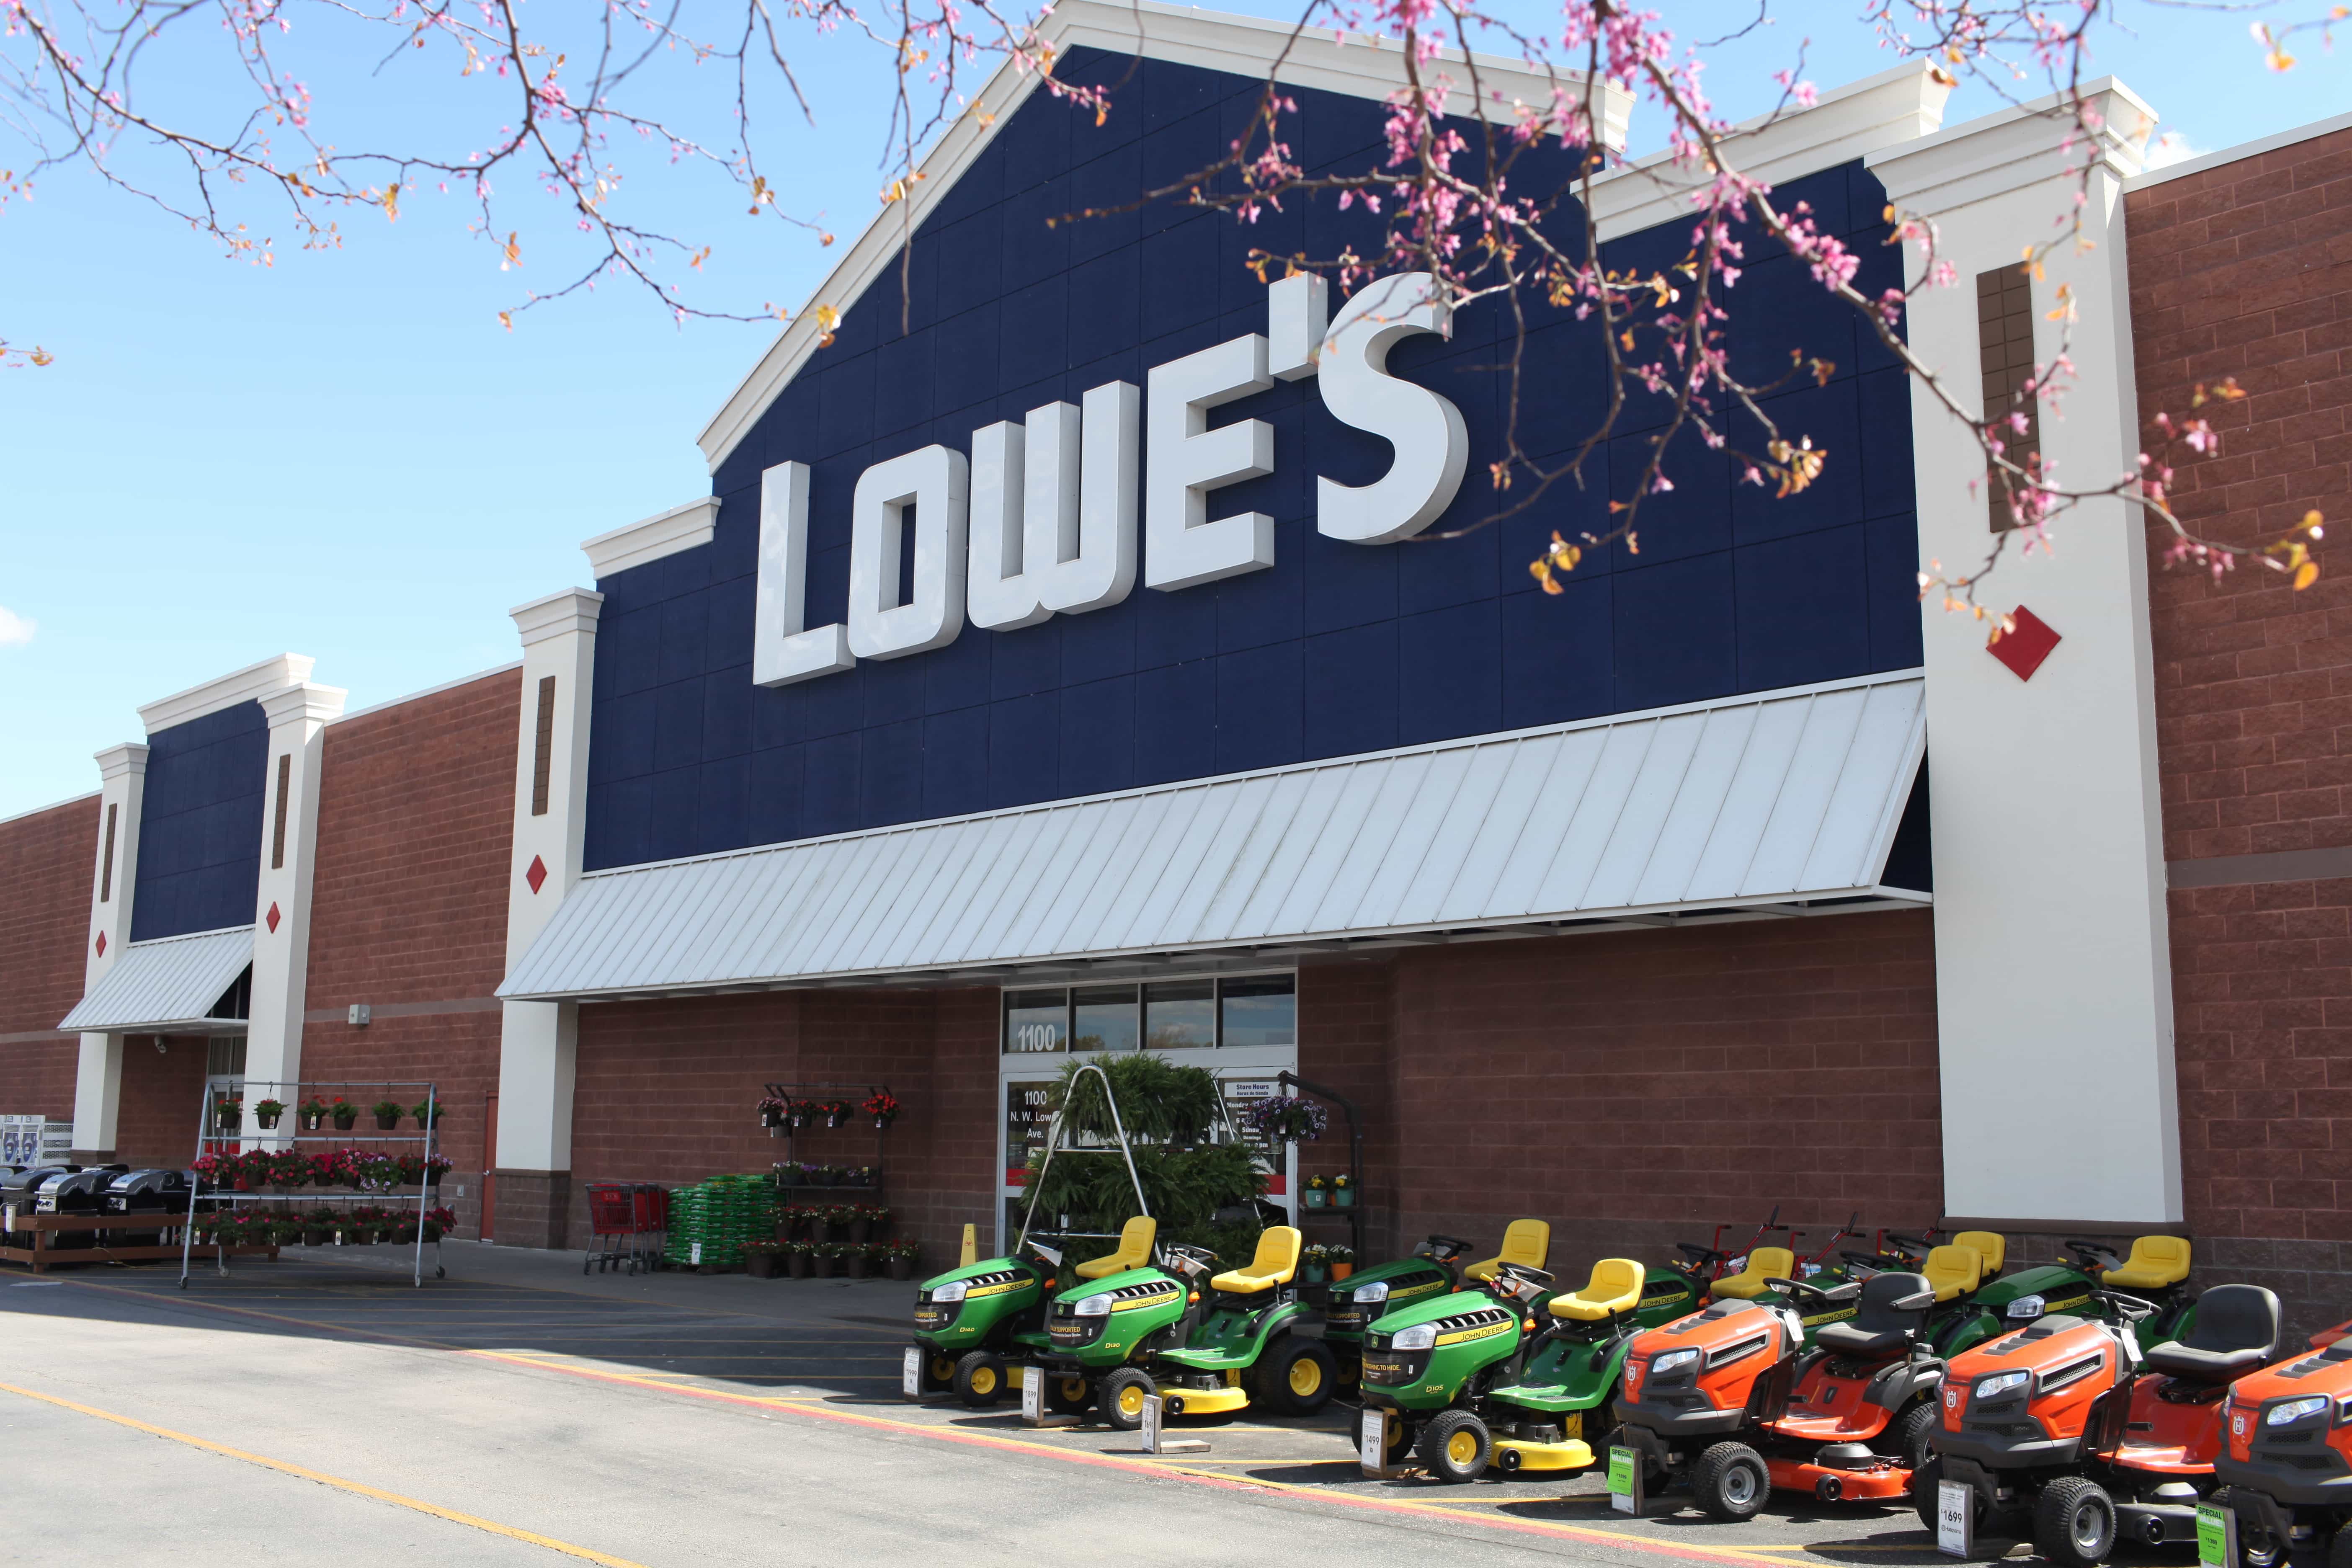 the hours for lowe's